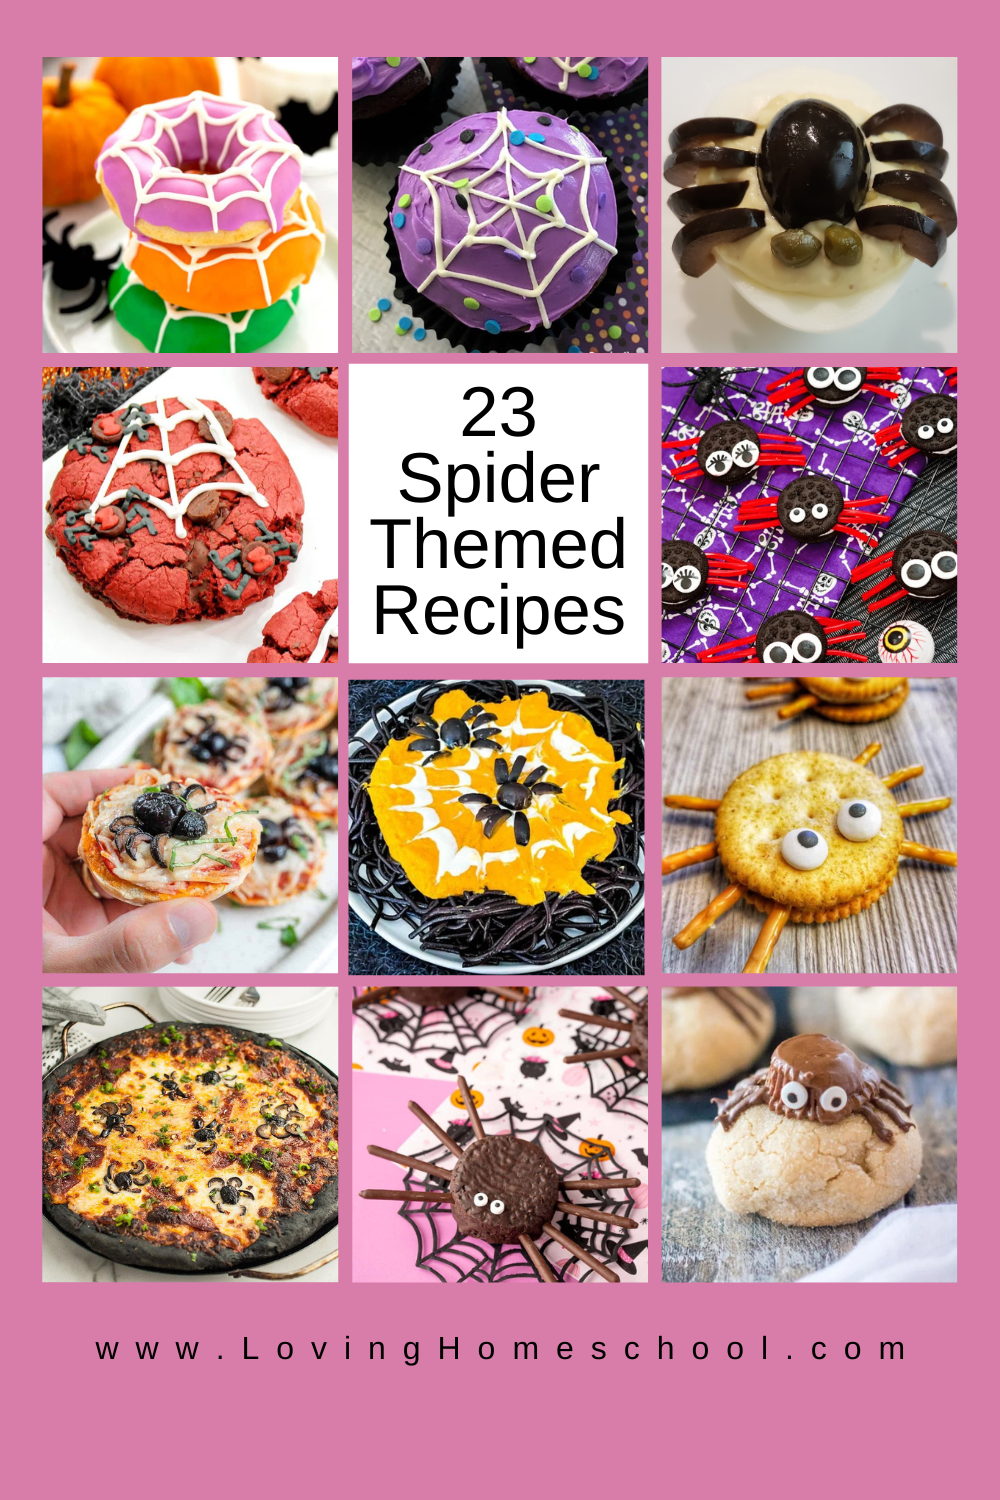 23 Spider Themed Recipes Pinterest Pin